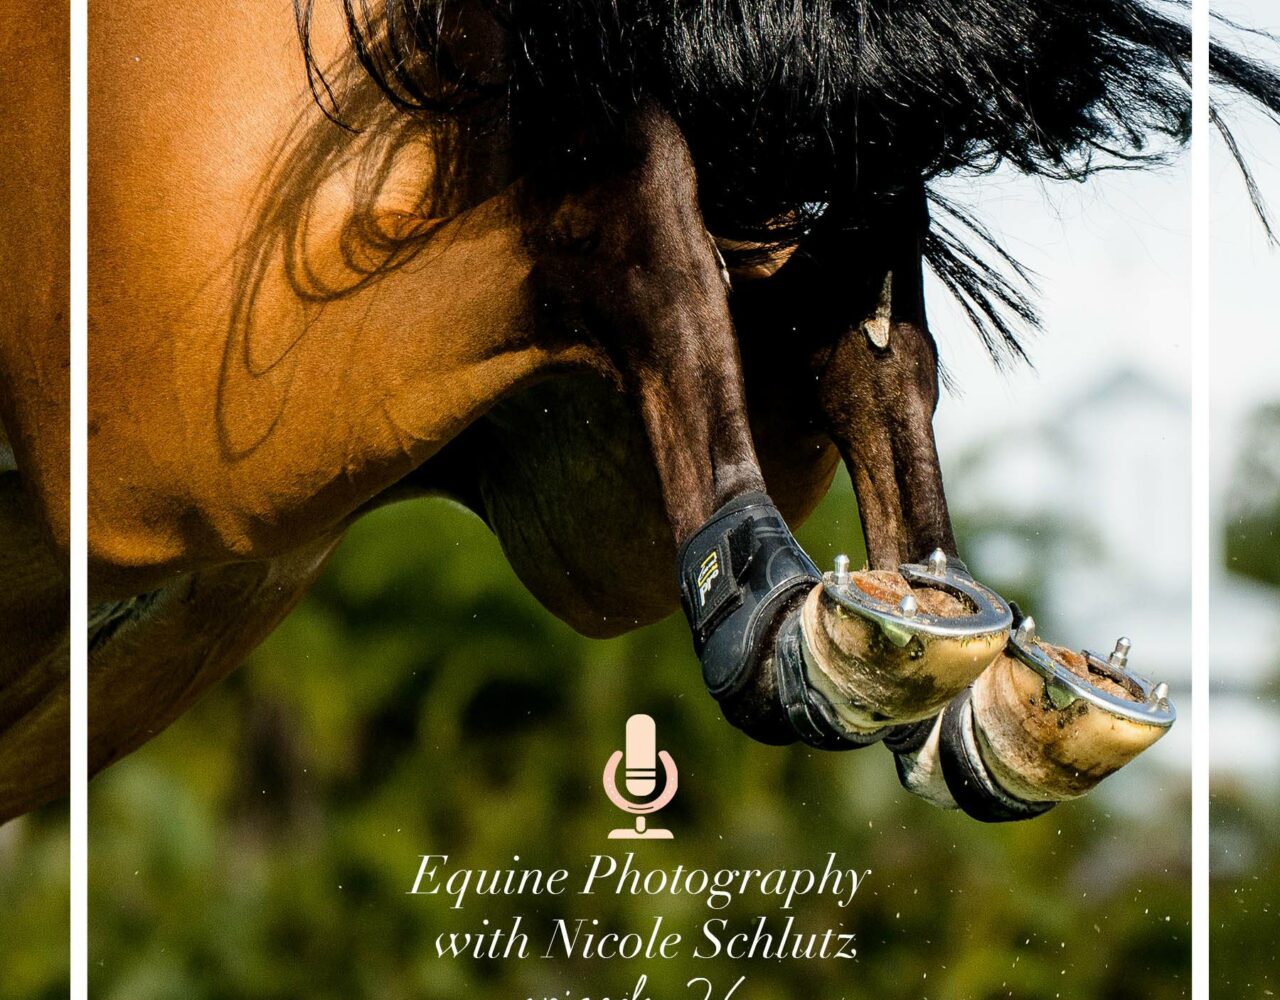 Equine Photography with Nicole Schultz